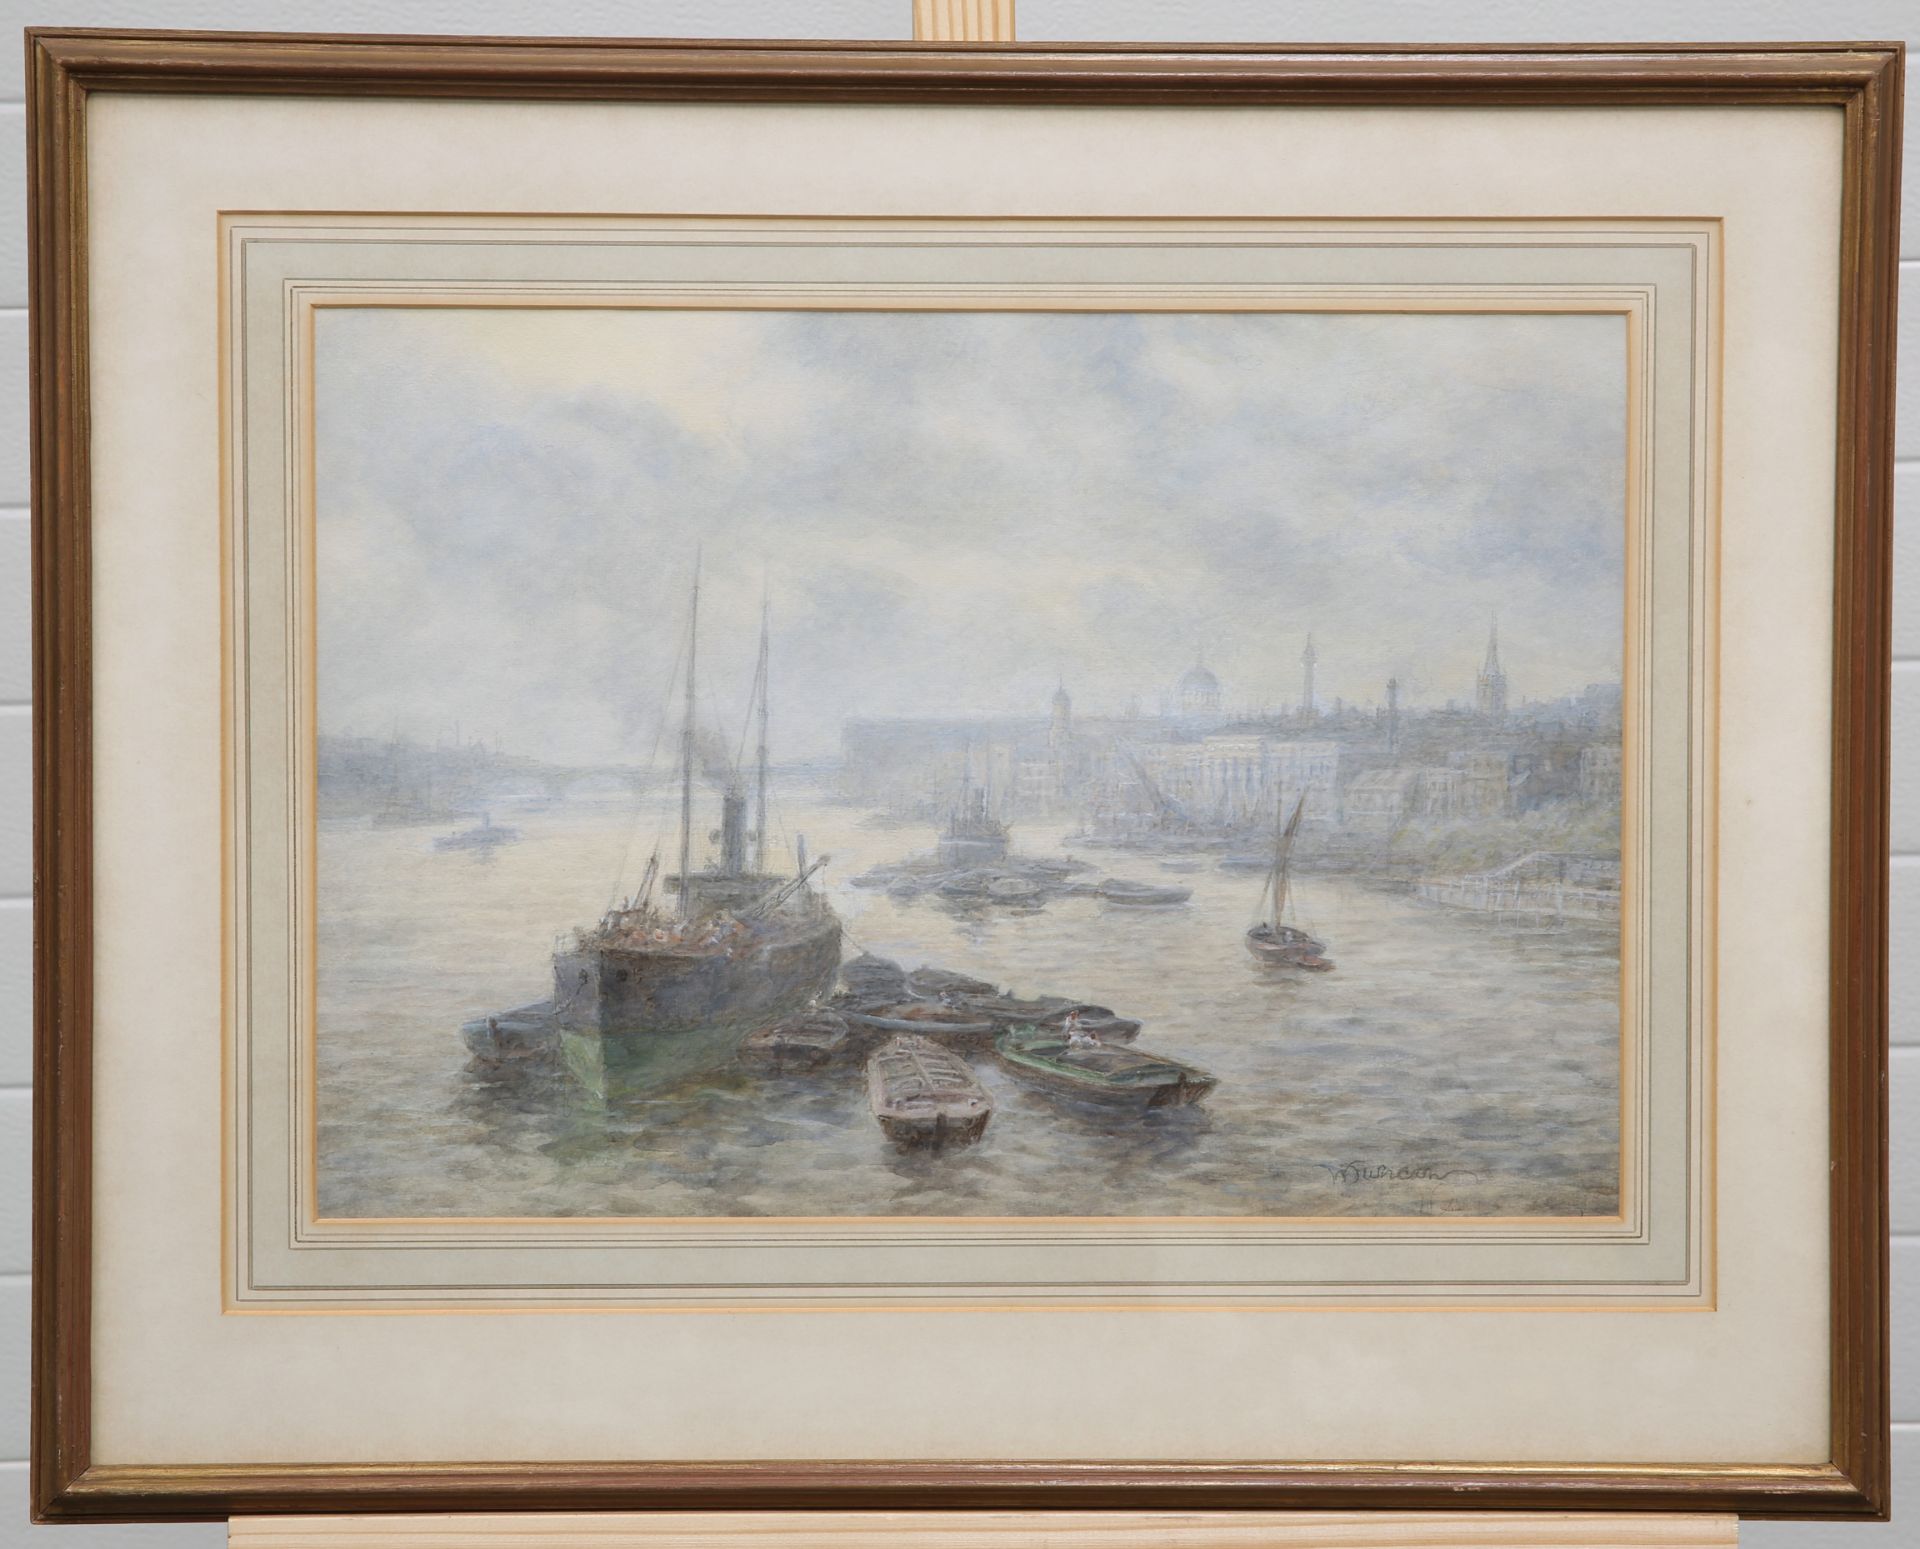 WALTER DUNCAN (EXH. 1880-1906), A VIEW ON THE RIVER THAMES - Image 2 of 2